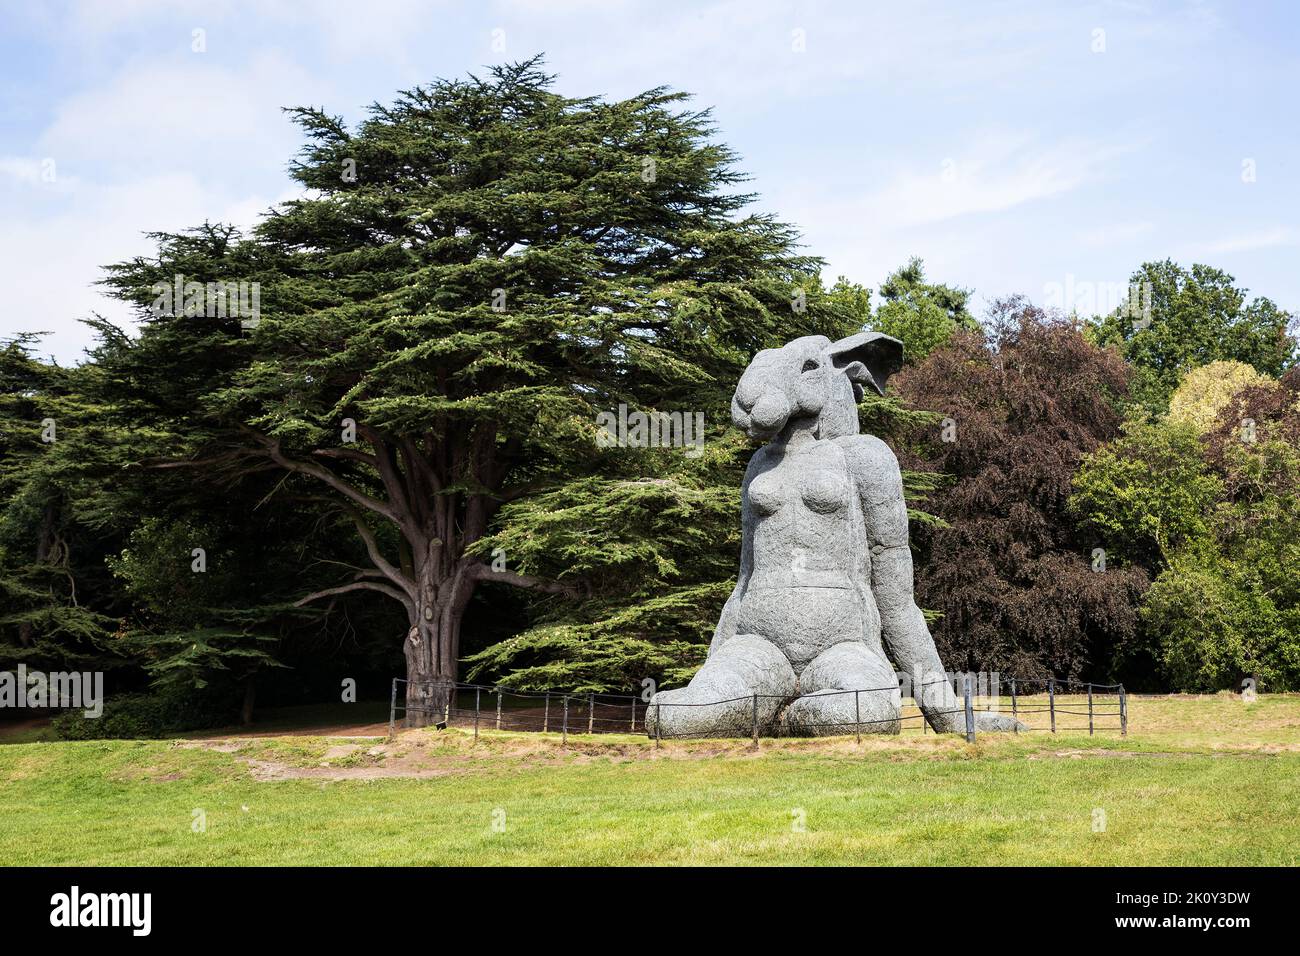 Sophie Ryder's artwork 'Sitting' combines a female body with the head of a hare is constructed from galvanised wire at the Yorkshire Sculpture Park Stock Photo